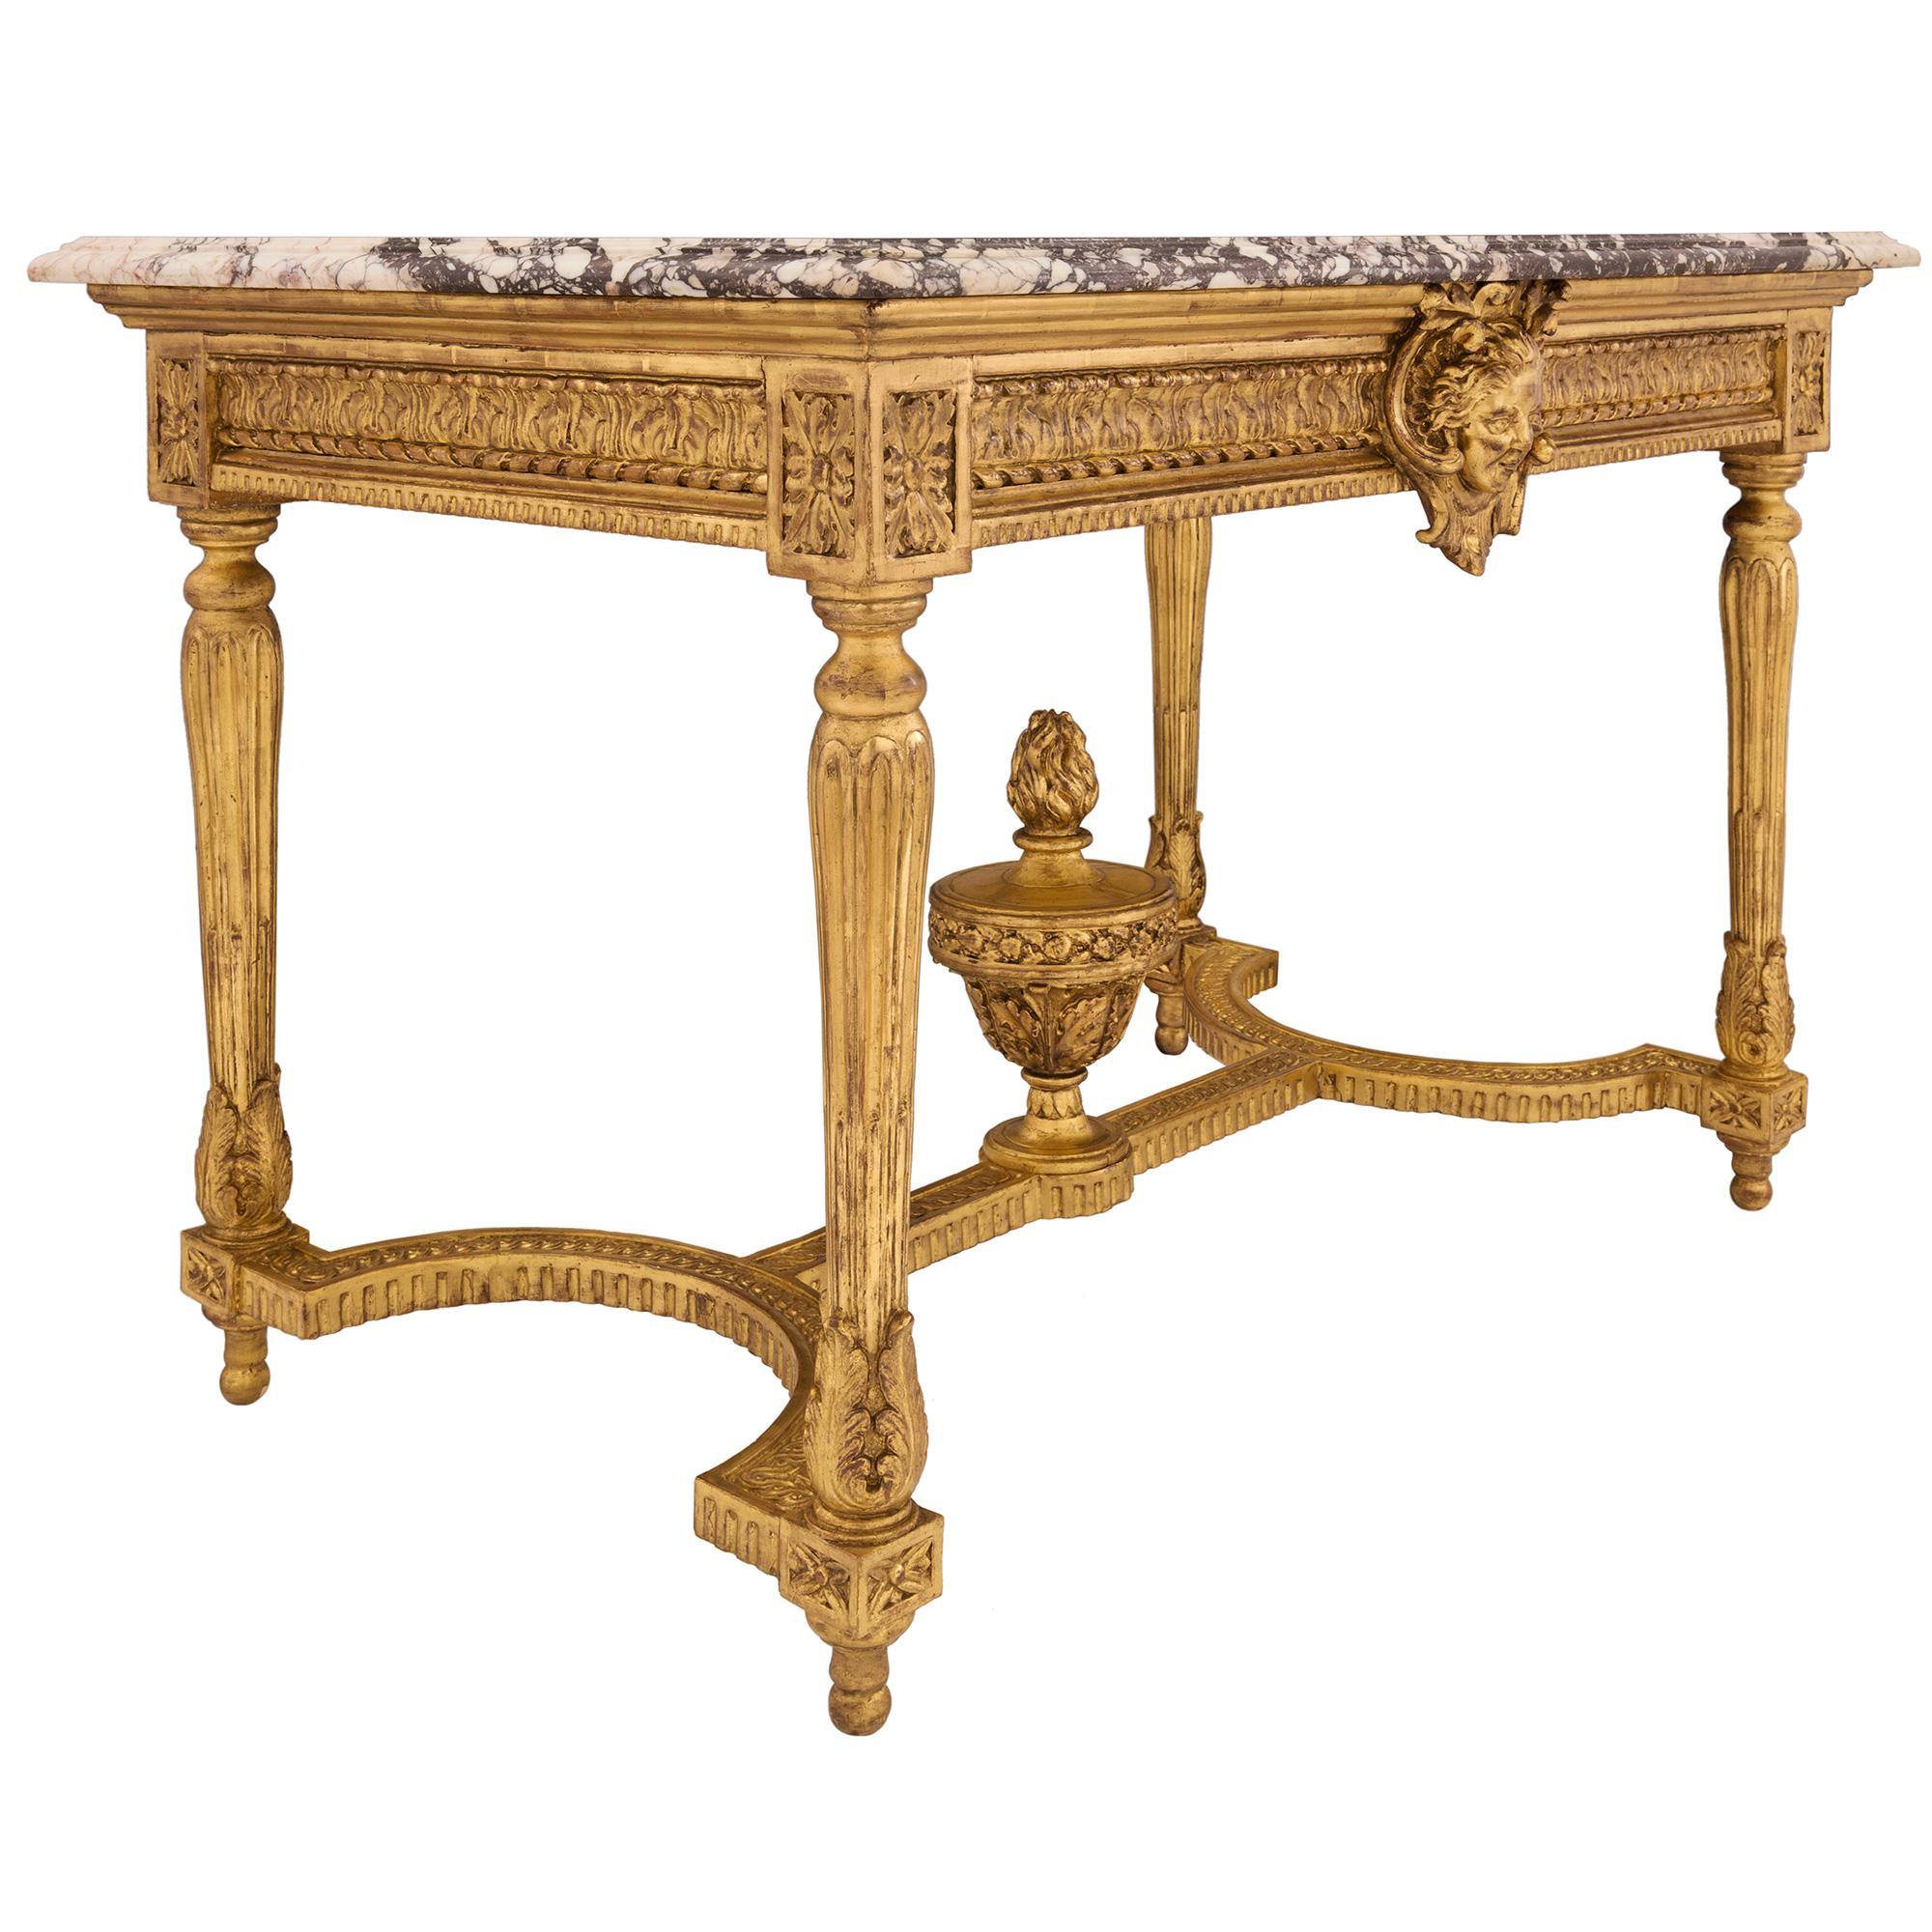 French Mid-19th Century Louis XVI Style Giltwood Center Table In Good Condition For Sale In West Palm Beach, FL